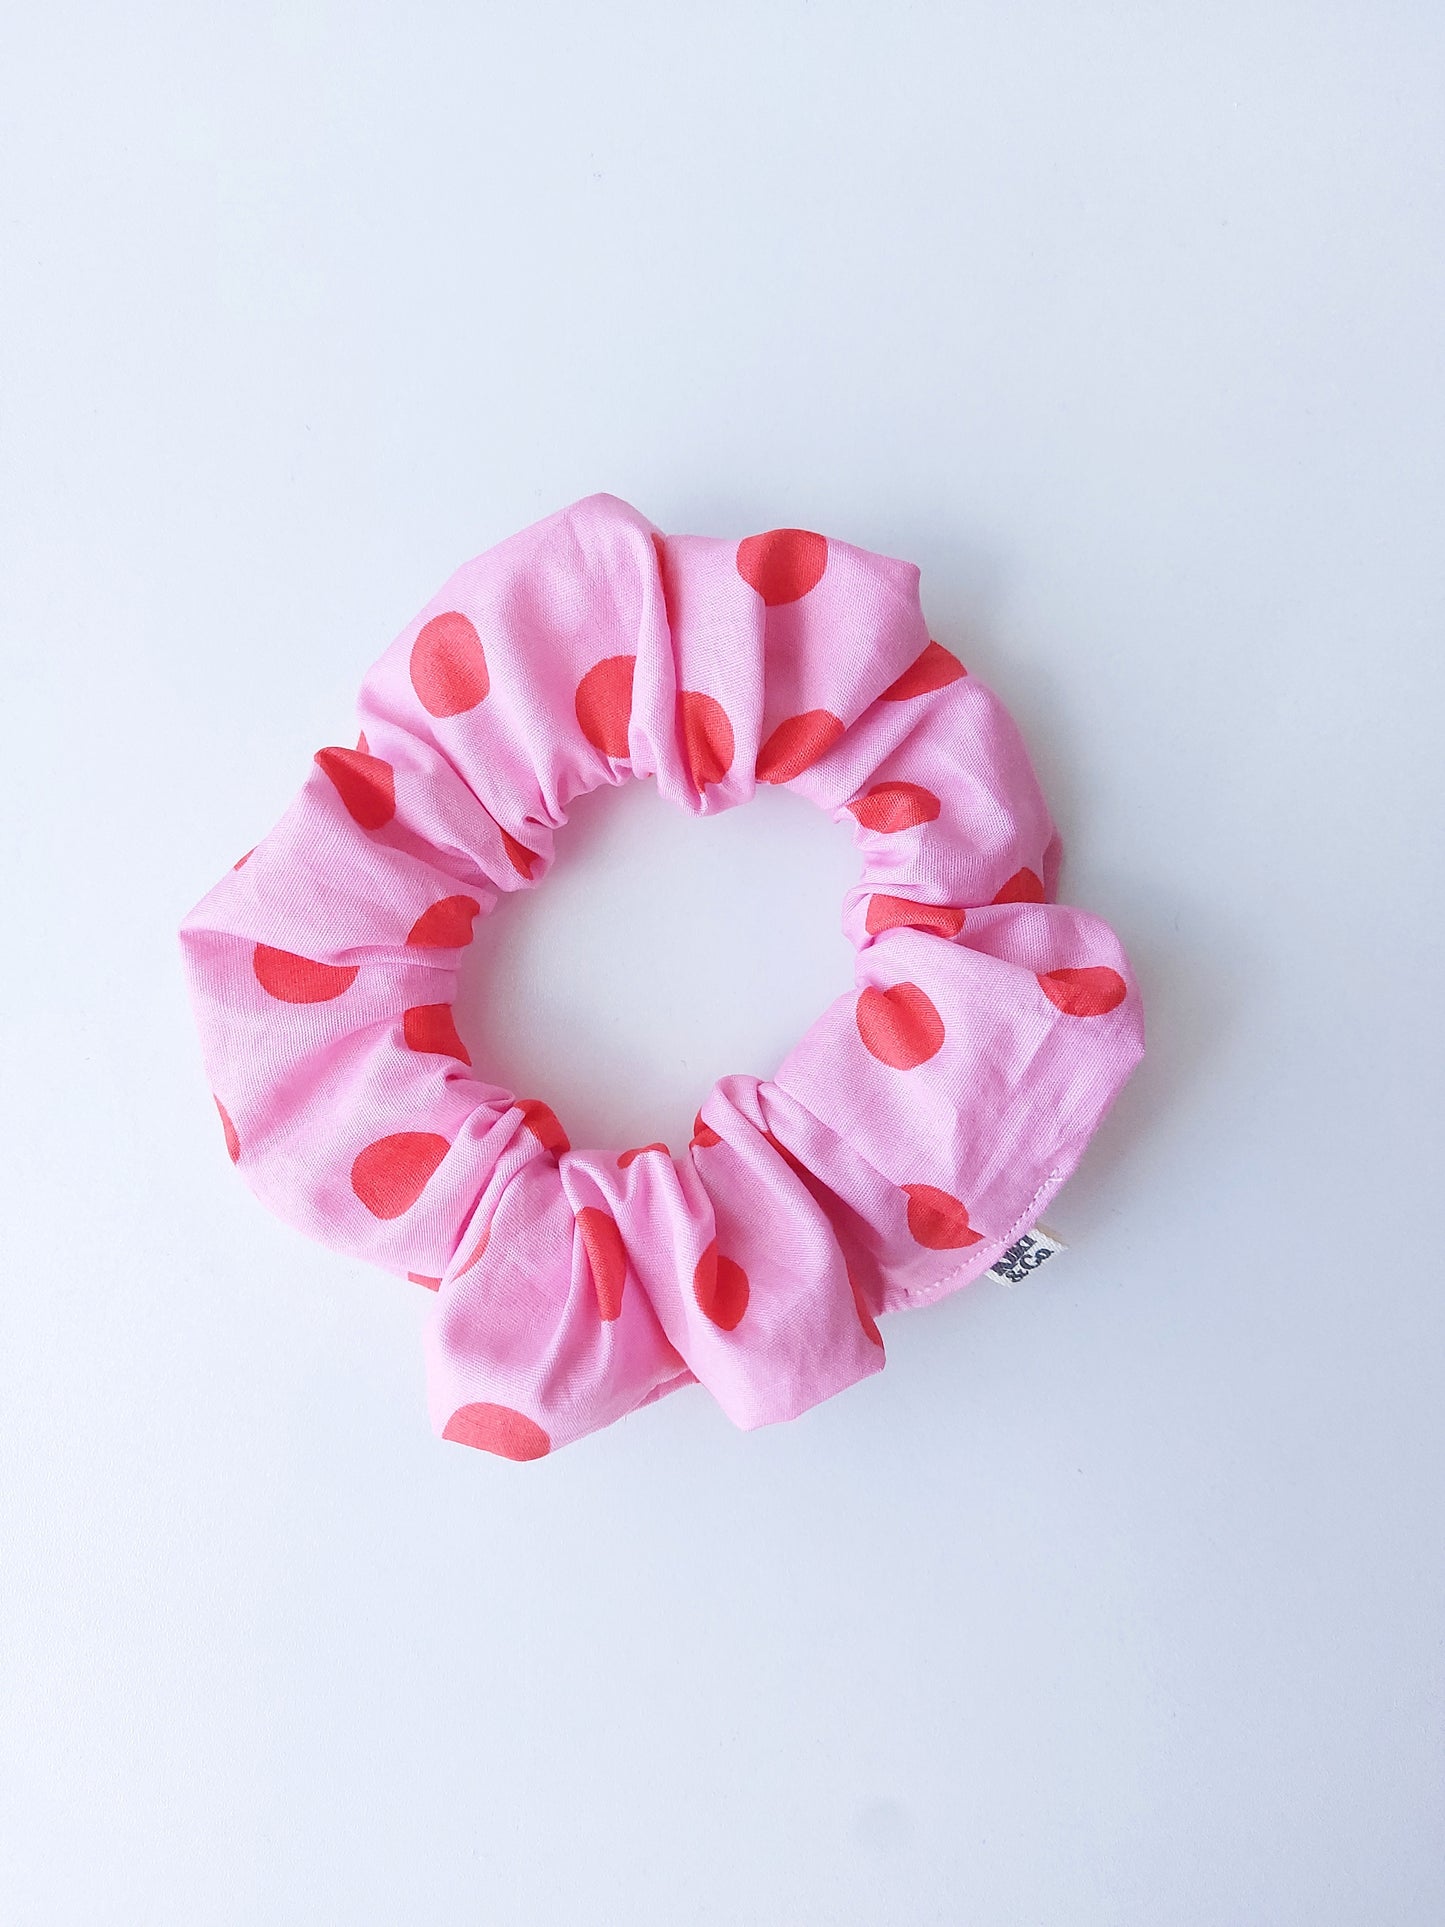 NEW Scrunchie / Pink & Red Polka dot / Cotton Fabric